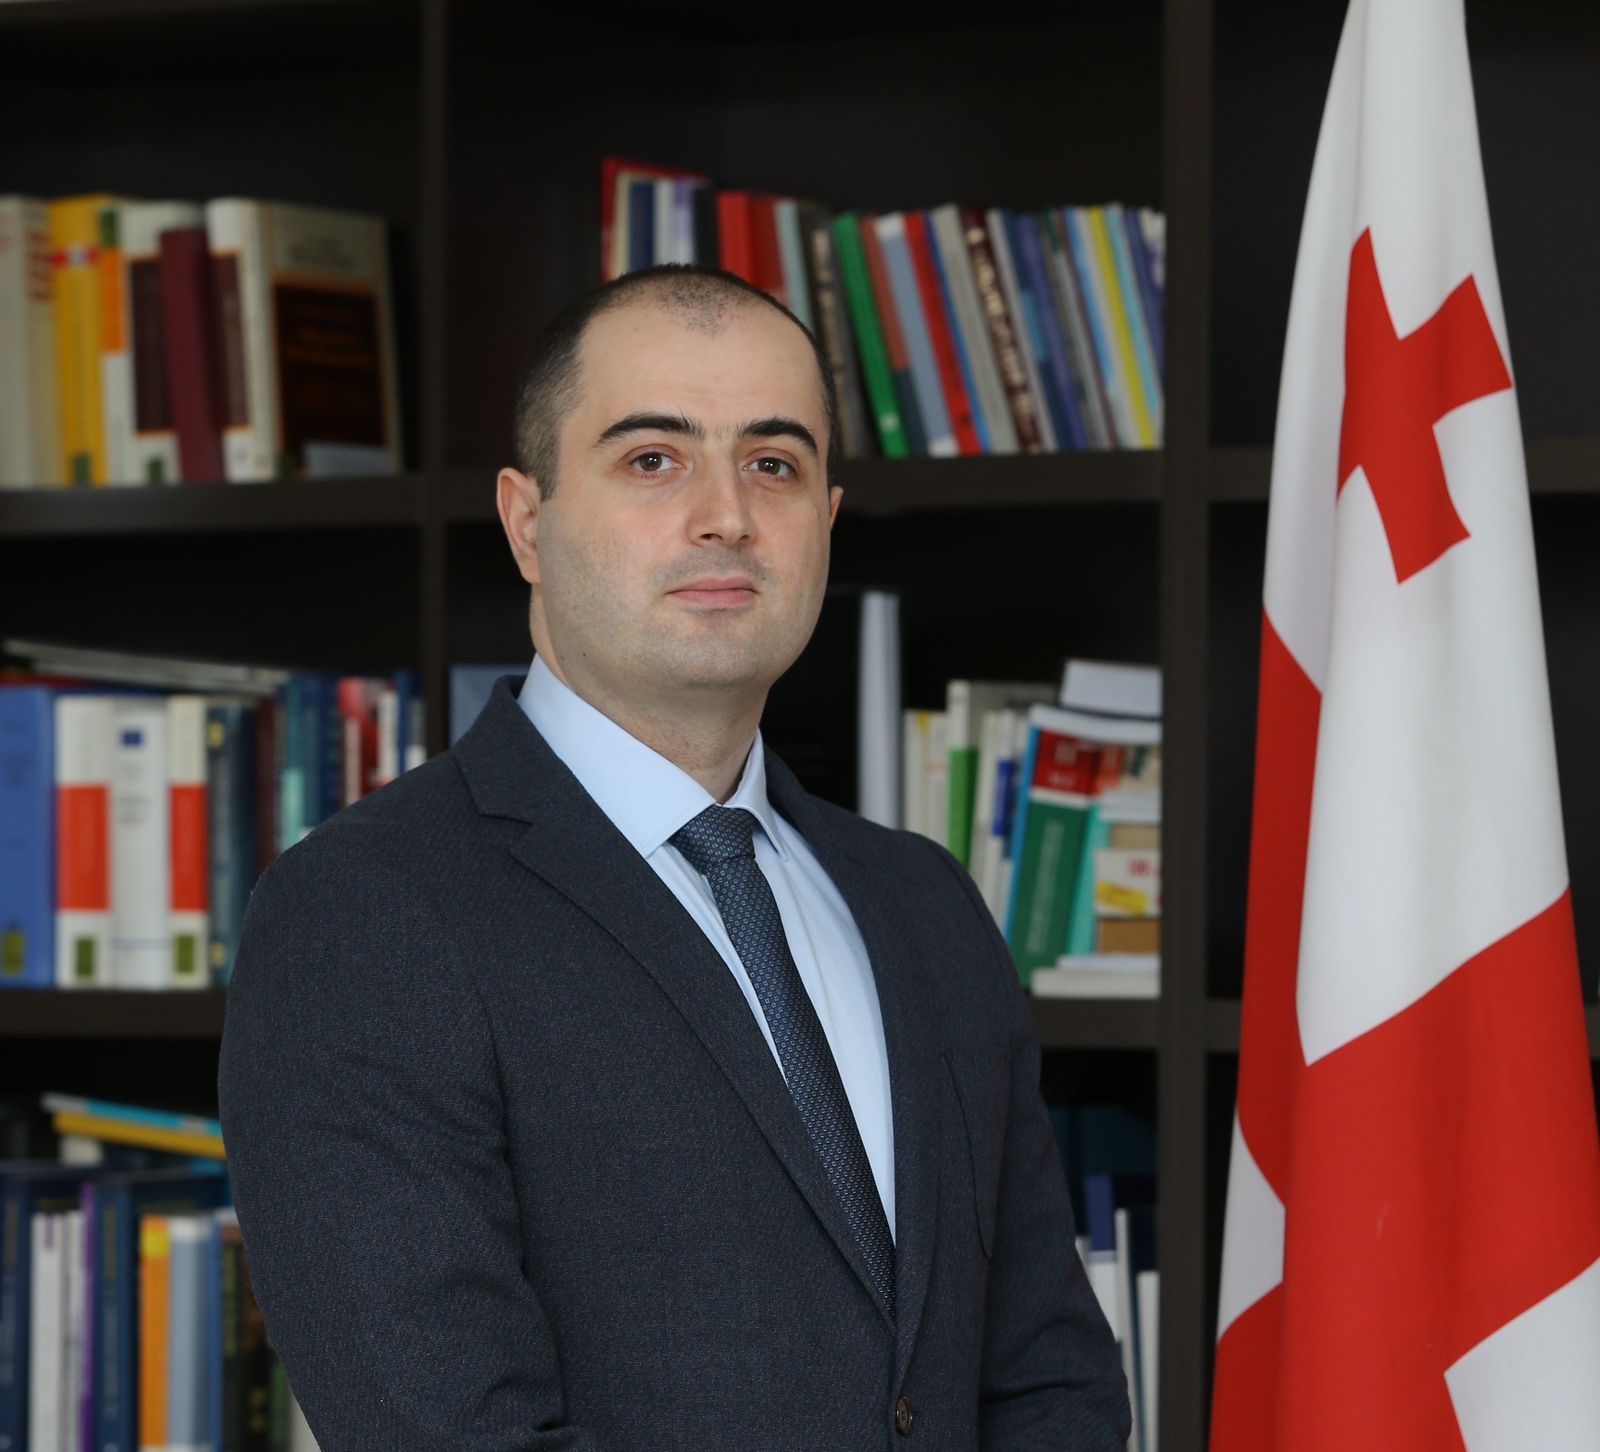 Congratulations to Mr. Teimuraz Chikhradze on being appointed as the Head of the Civil Service Bureau of Georgia